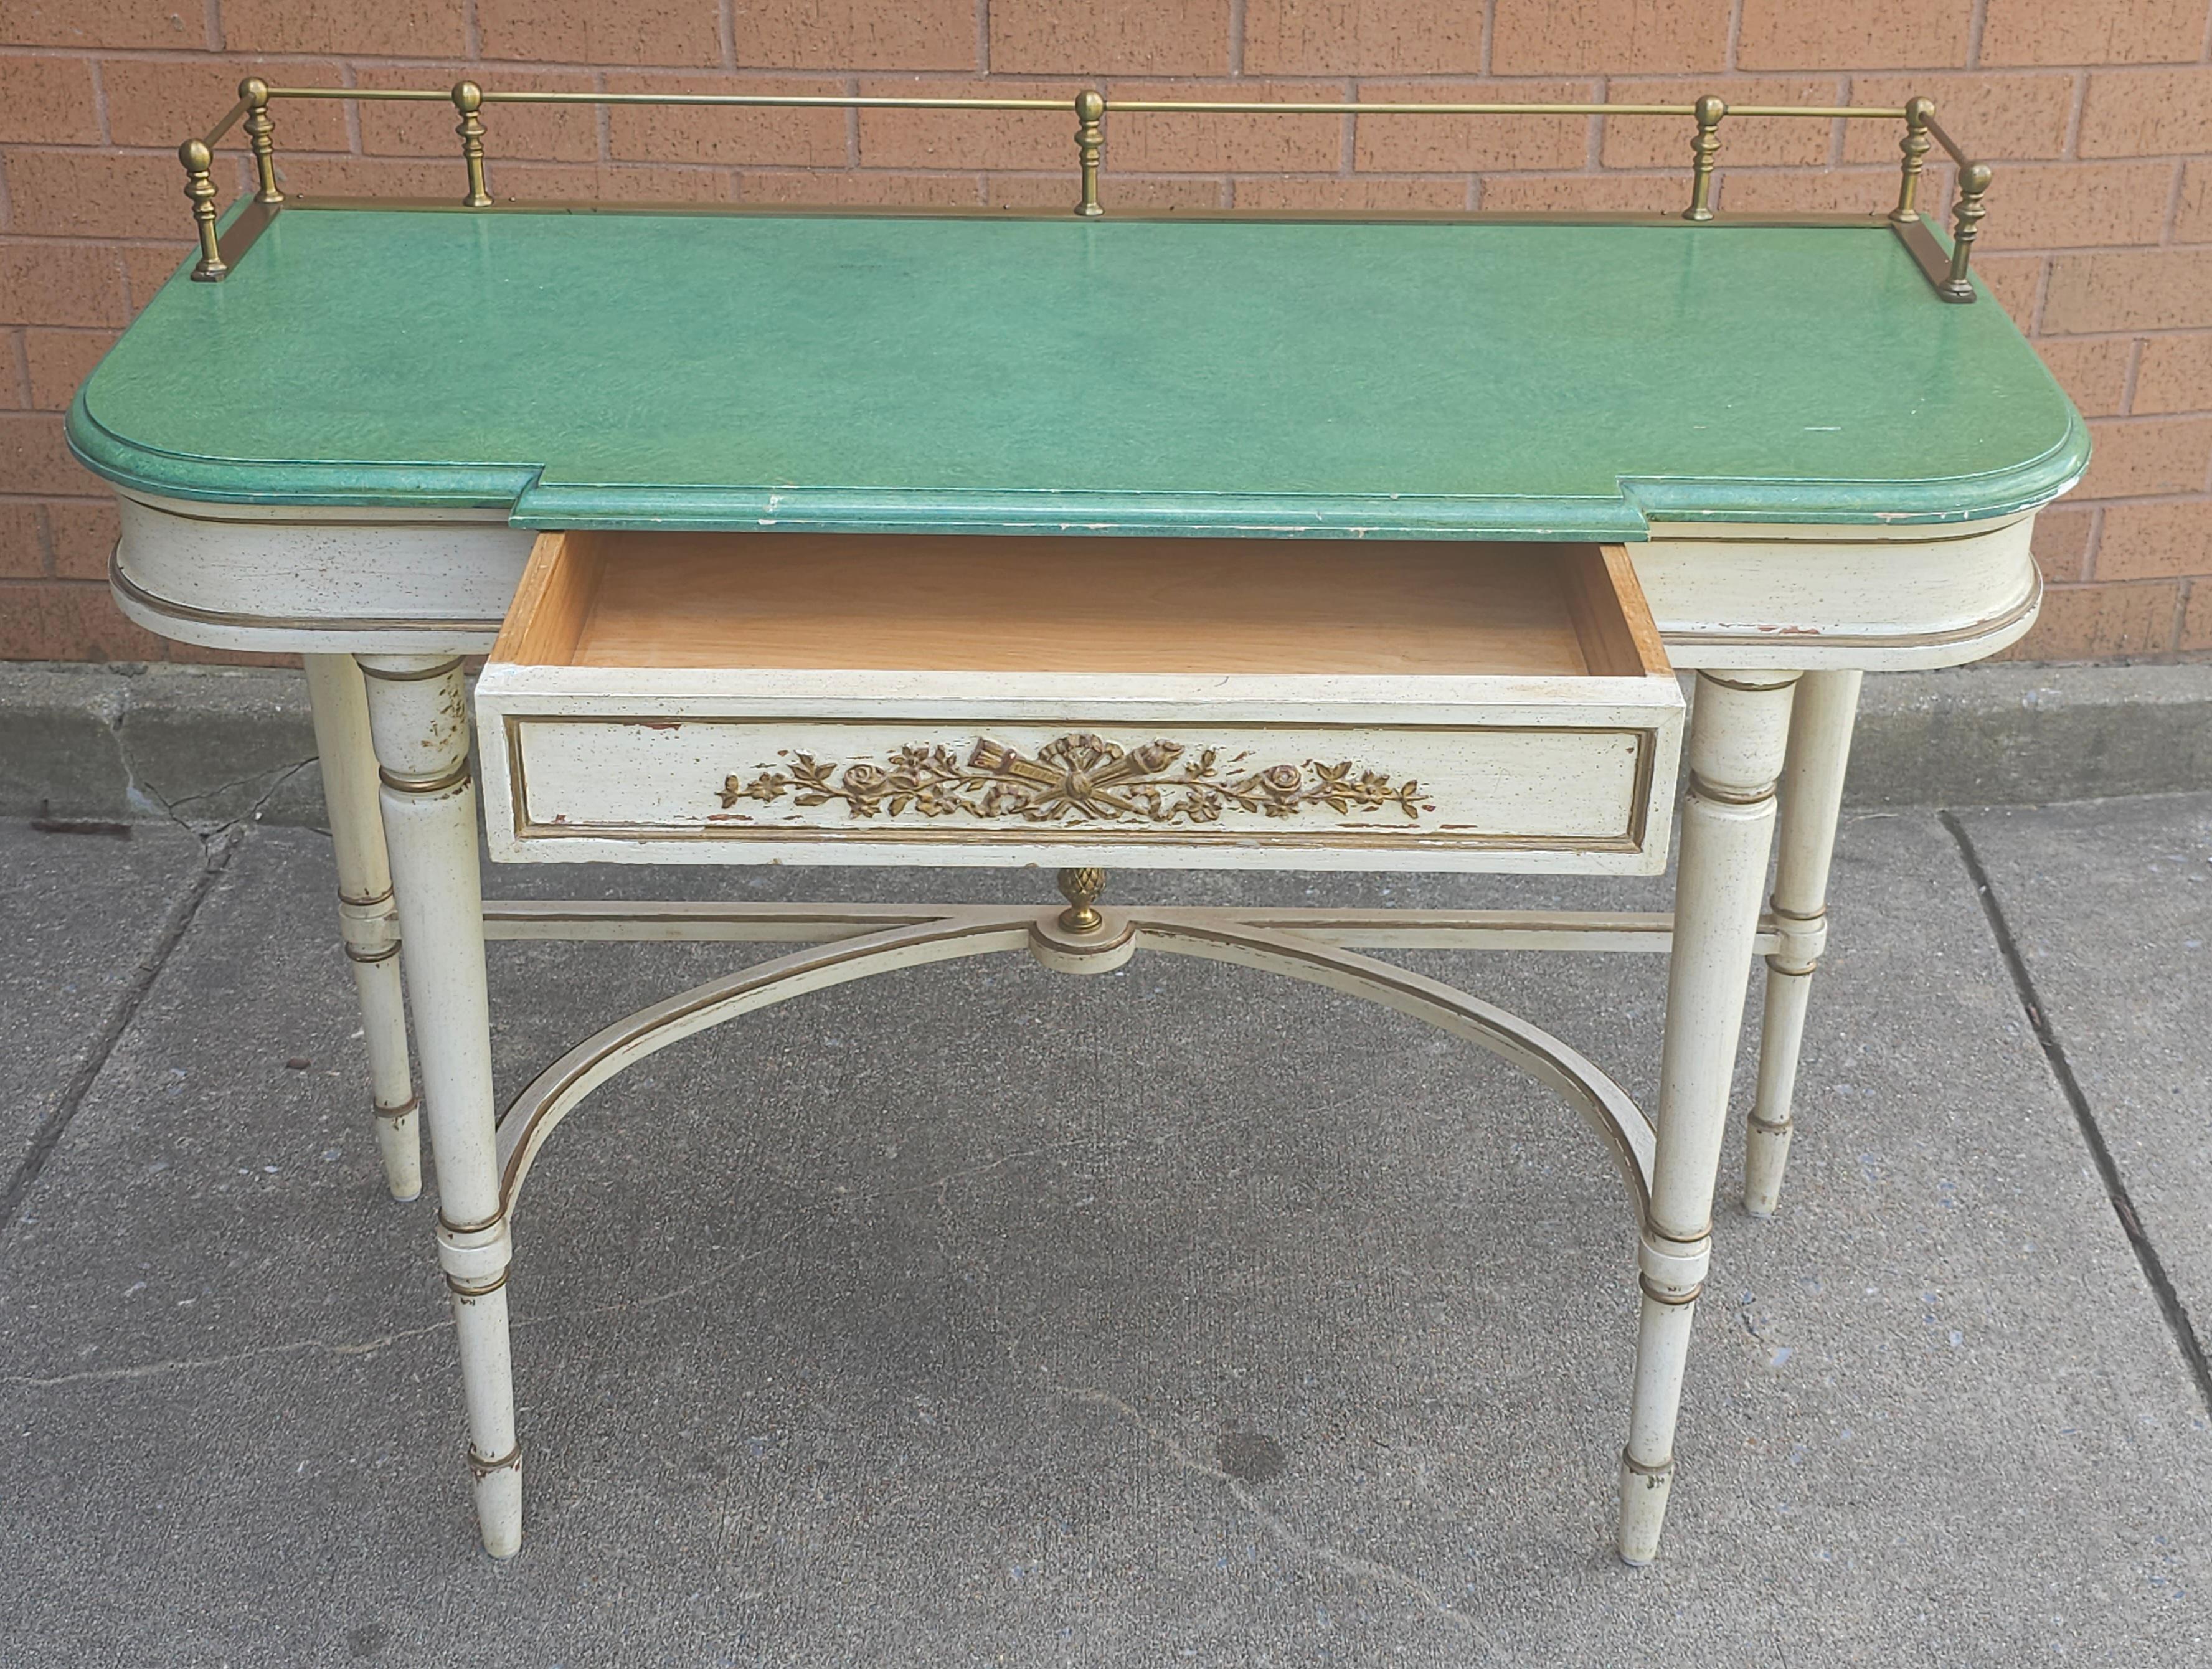 Louis XVI Style Partial Gilt, Cream and Green Enamel Painted Console Table In Good Condition For Sale In Germantown, MD